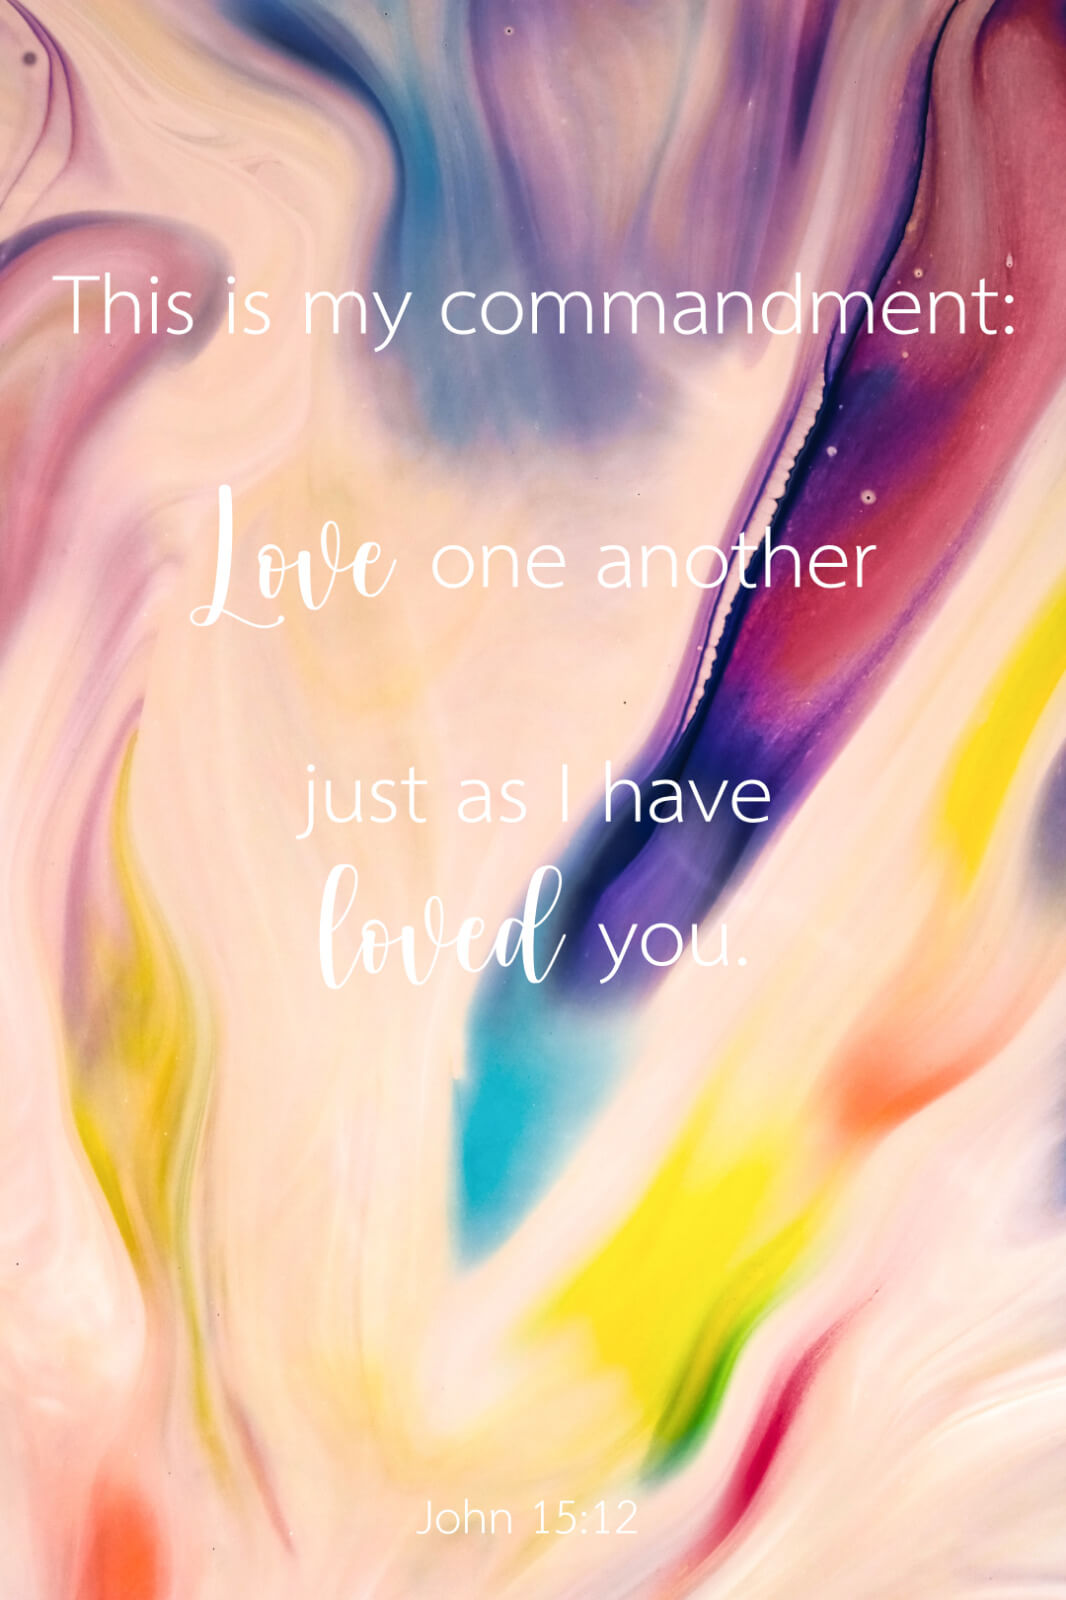 This is my commandment: Love one another, just as I have loved you. (John 15:12)